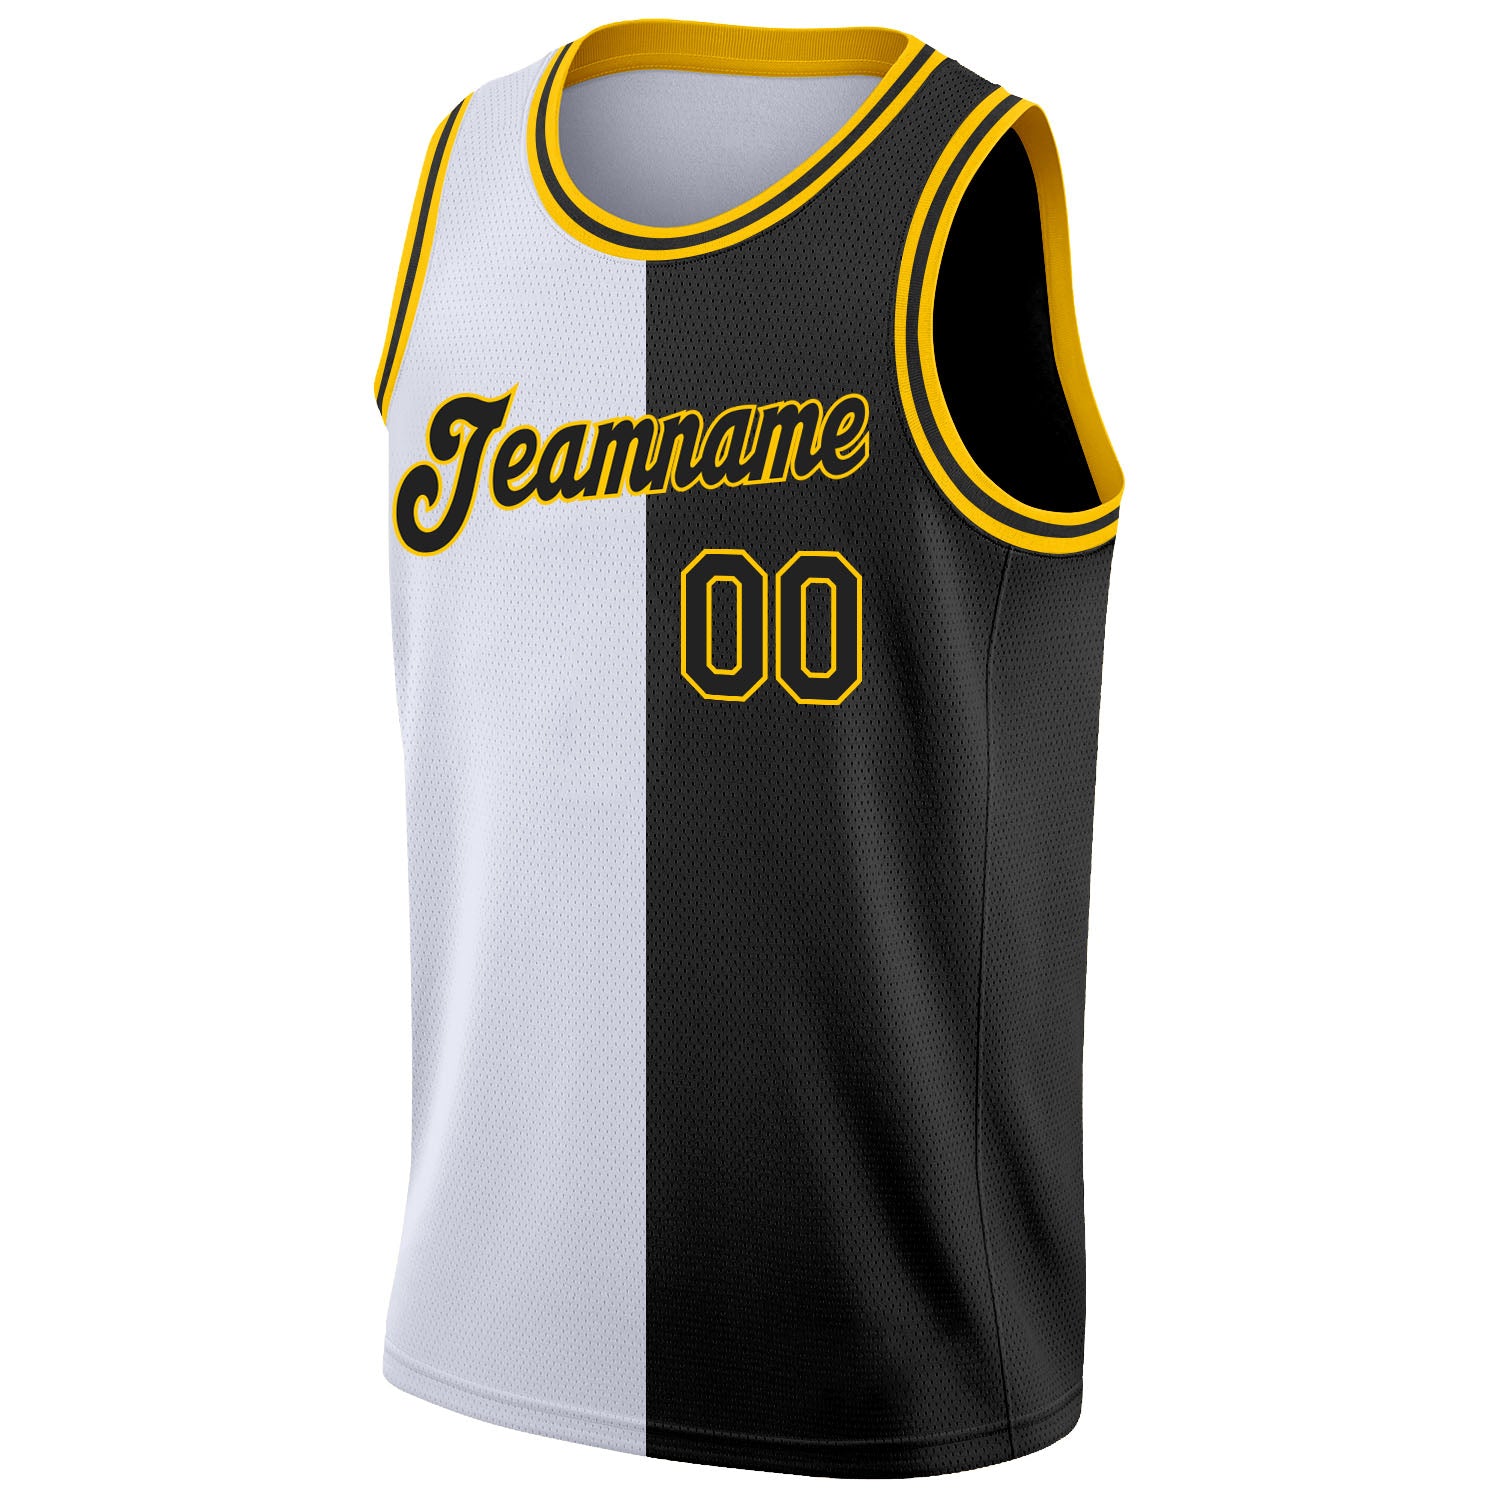 FANSIDEA Custom Black Black-Gold Authentic Throwback Basketball Jersey Youth Size:L